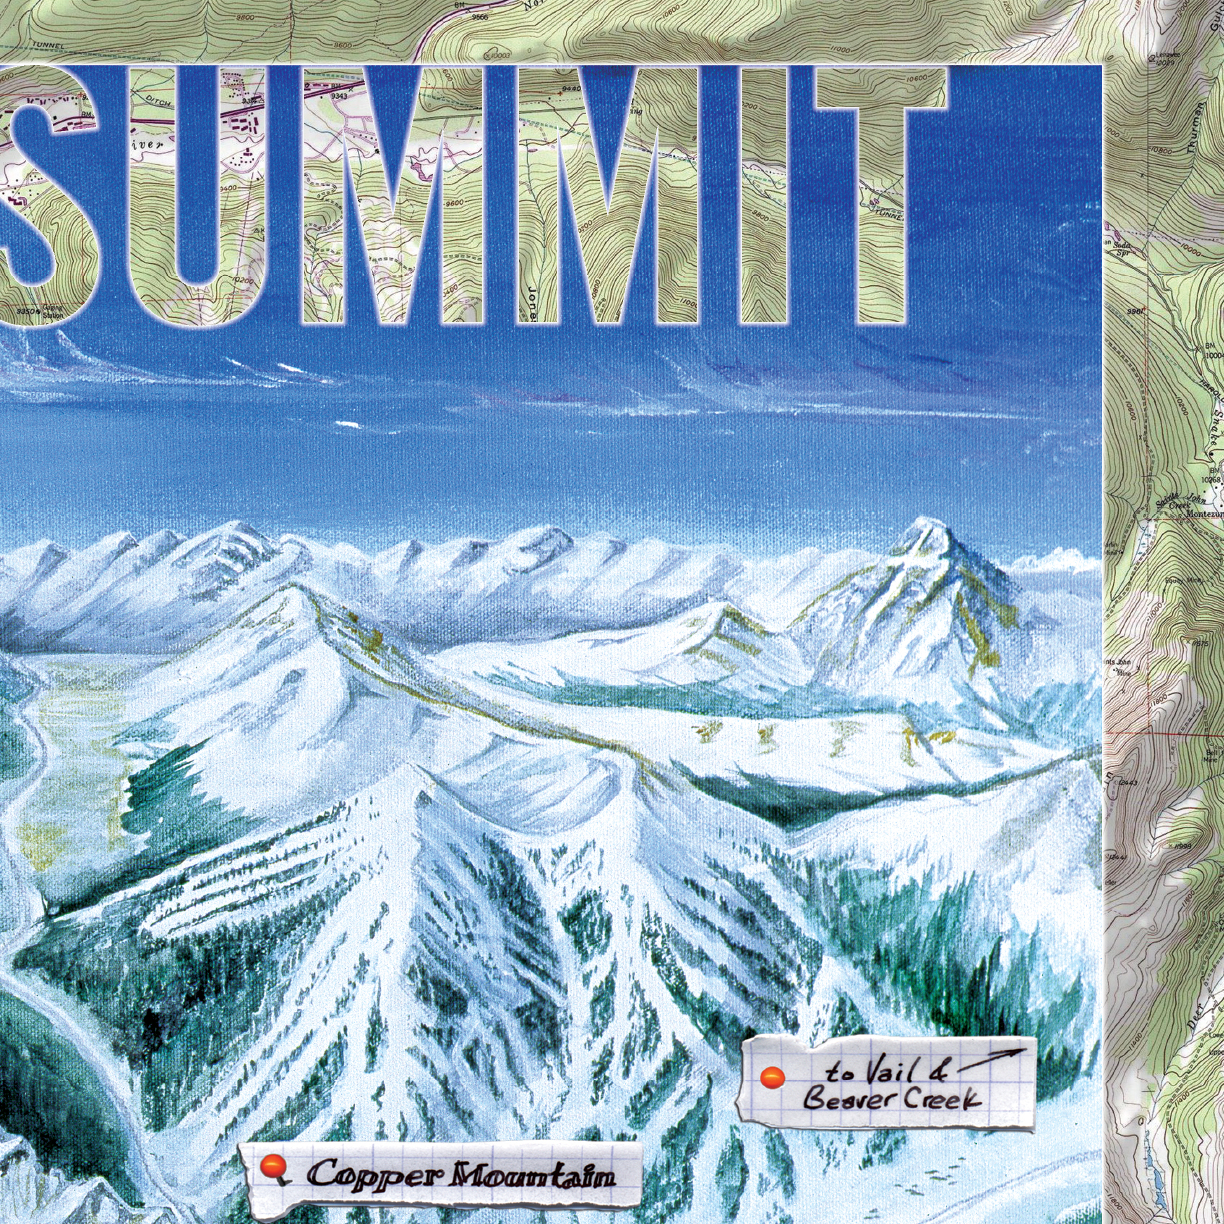 Experience the Summit Detail